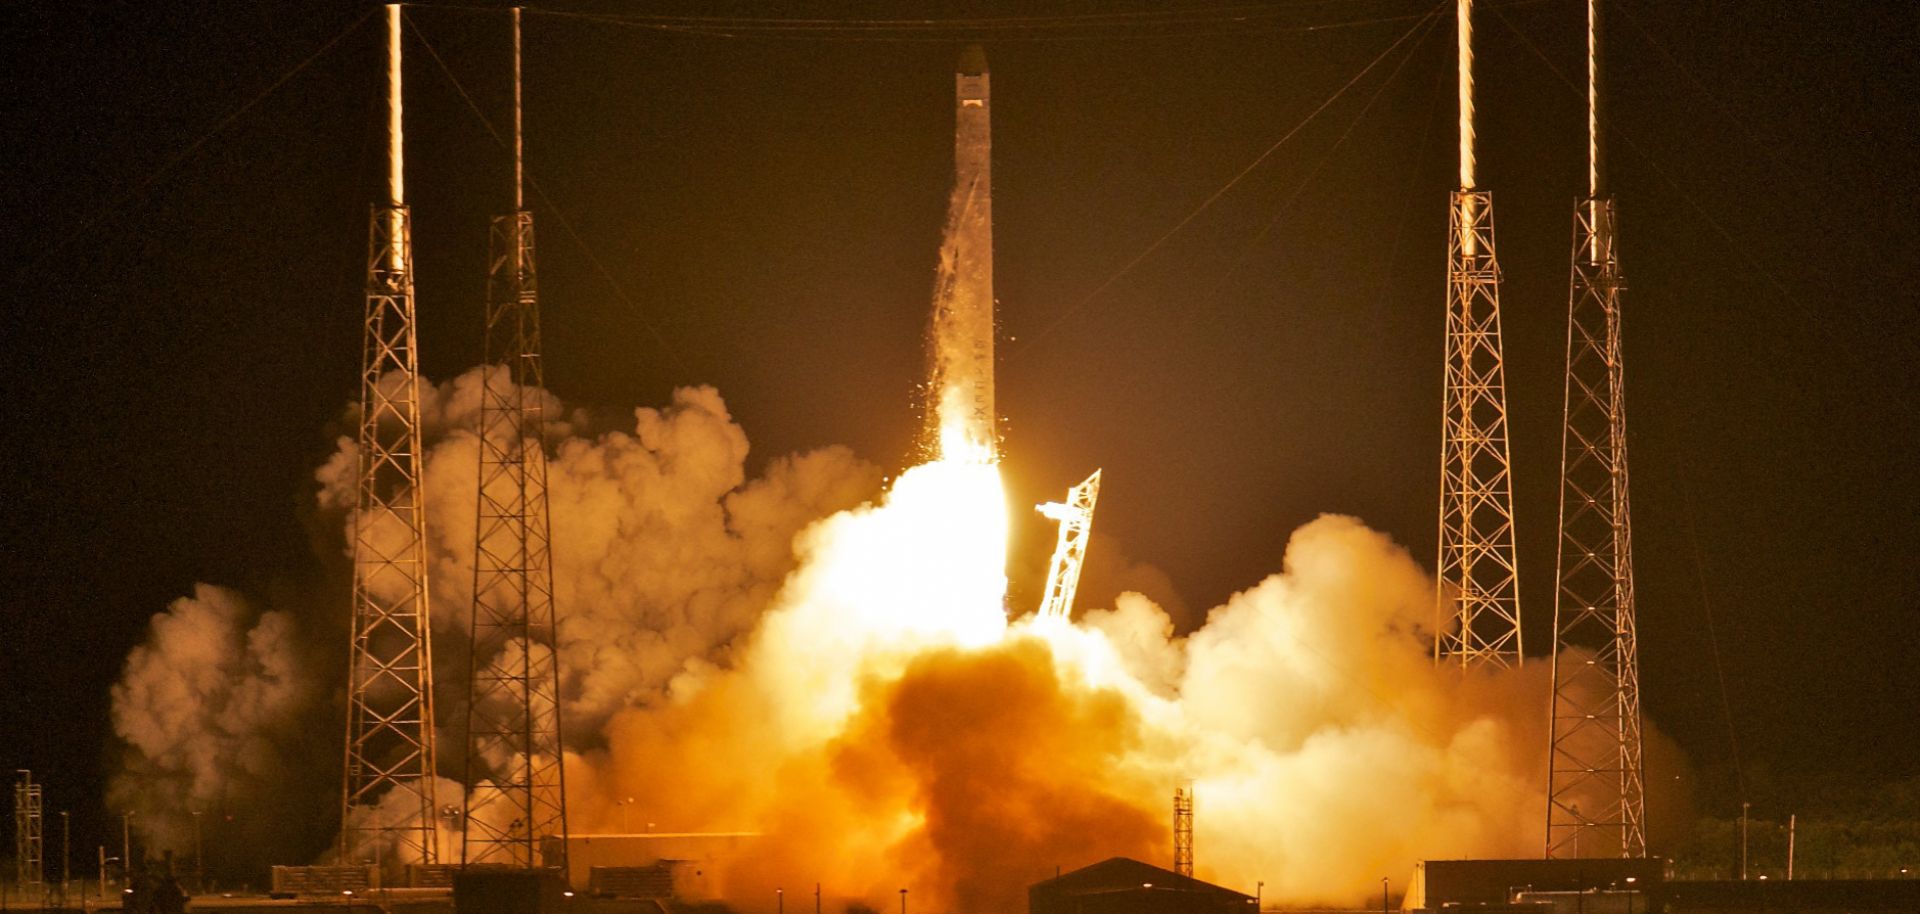 SpaceX's Dragon spacecraft atop rocket Falcon 9 lifts off from Pad 40 of the Cape Canaveral Air Force Station in Florida. While Russia dominates the global space industry, competition from private U.S. companies will force it to reform.